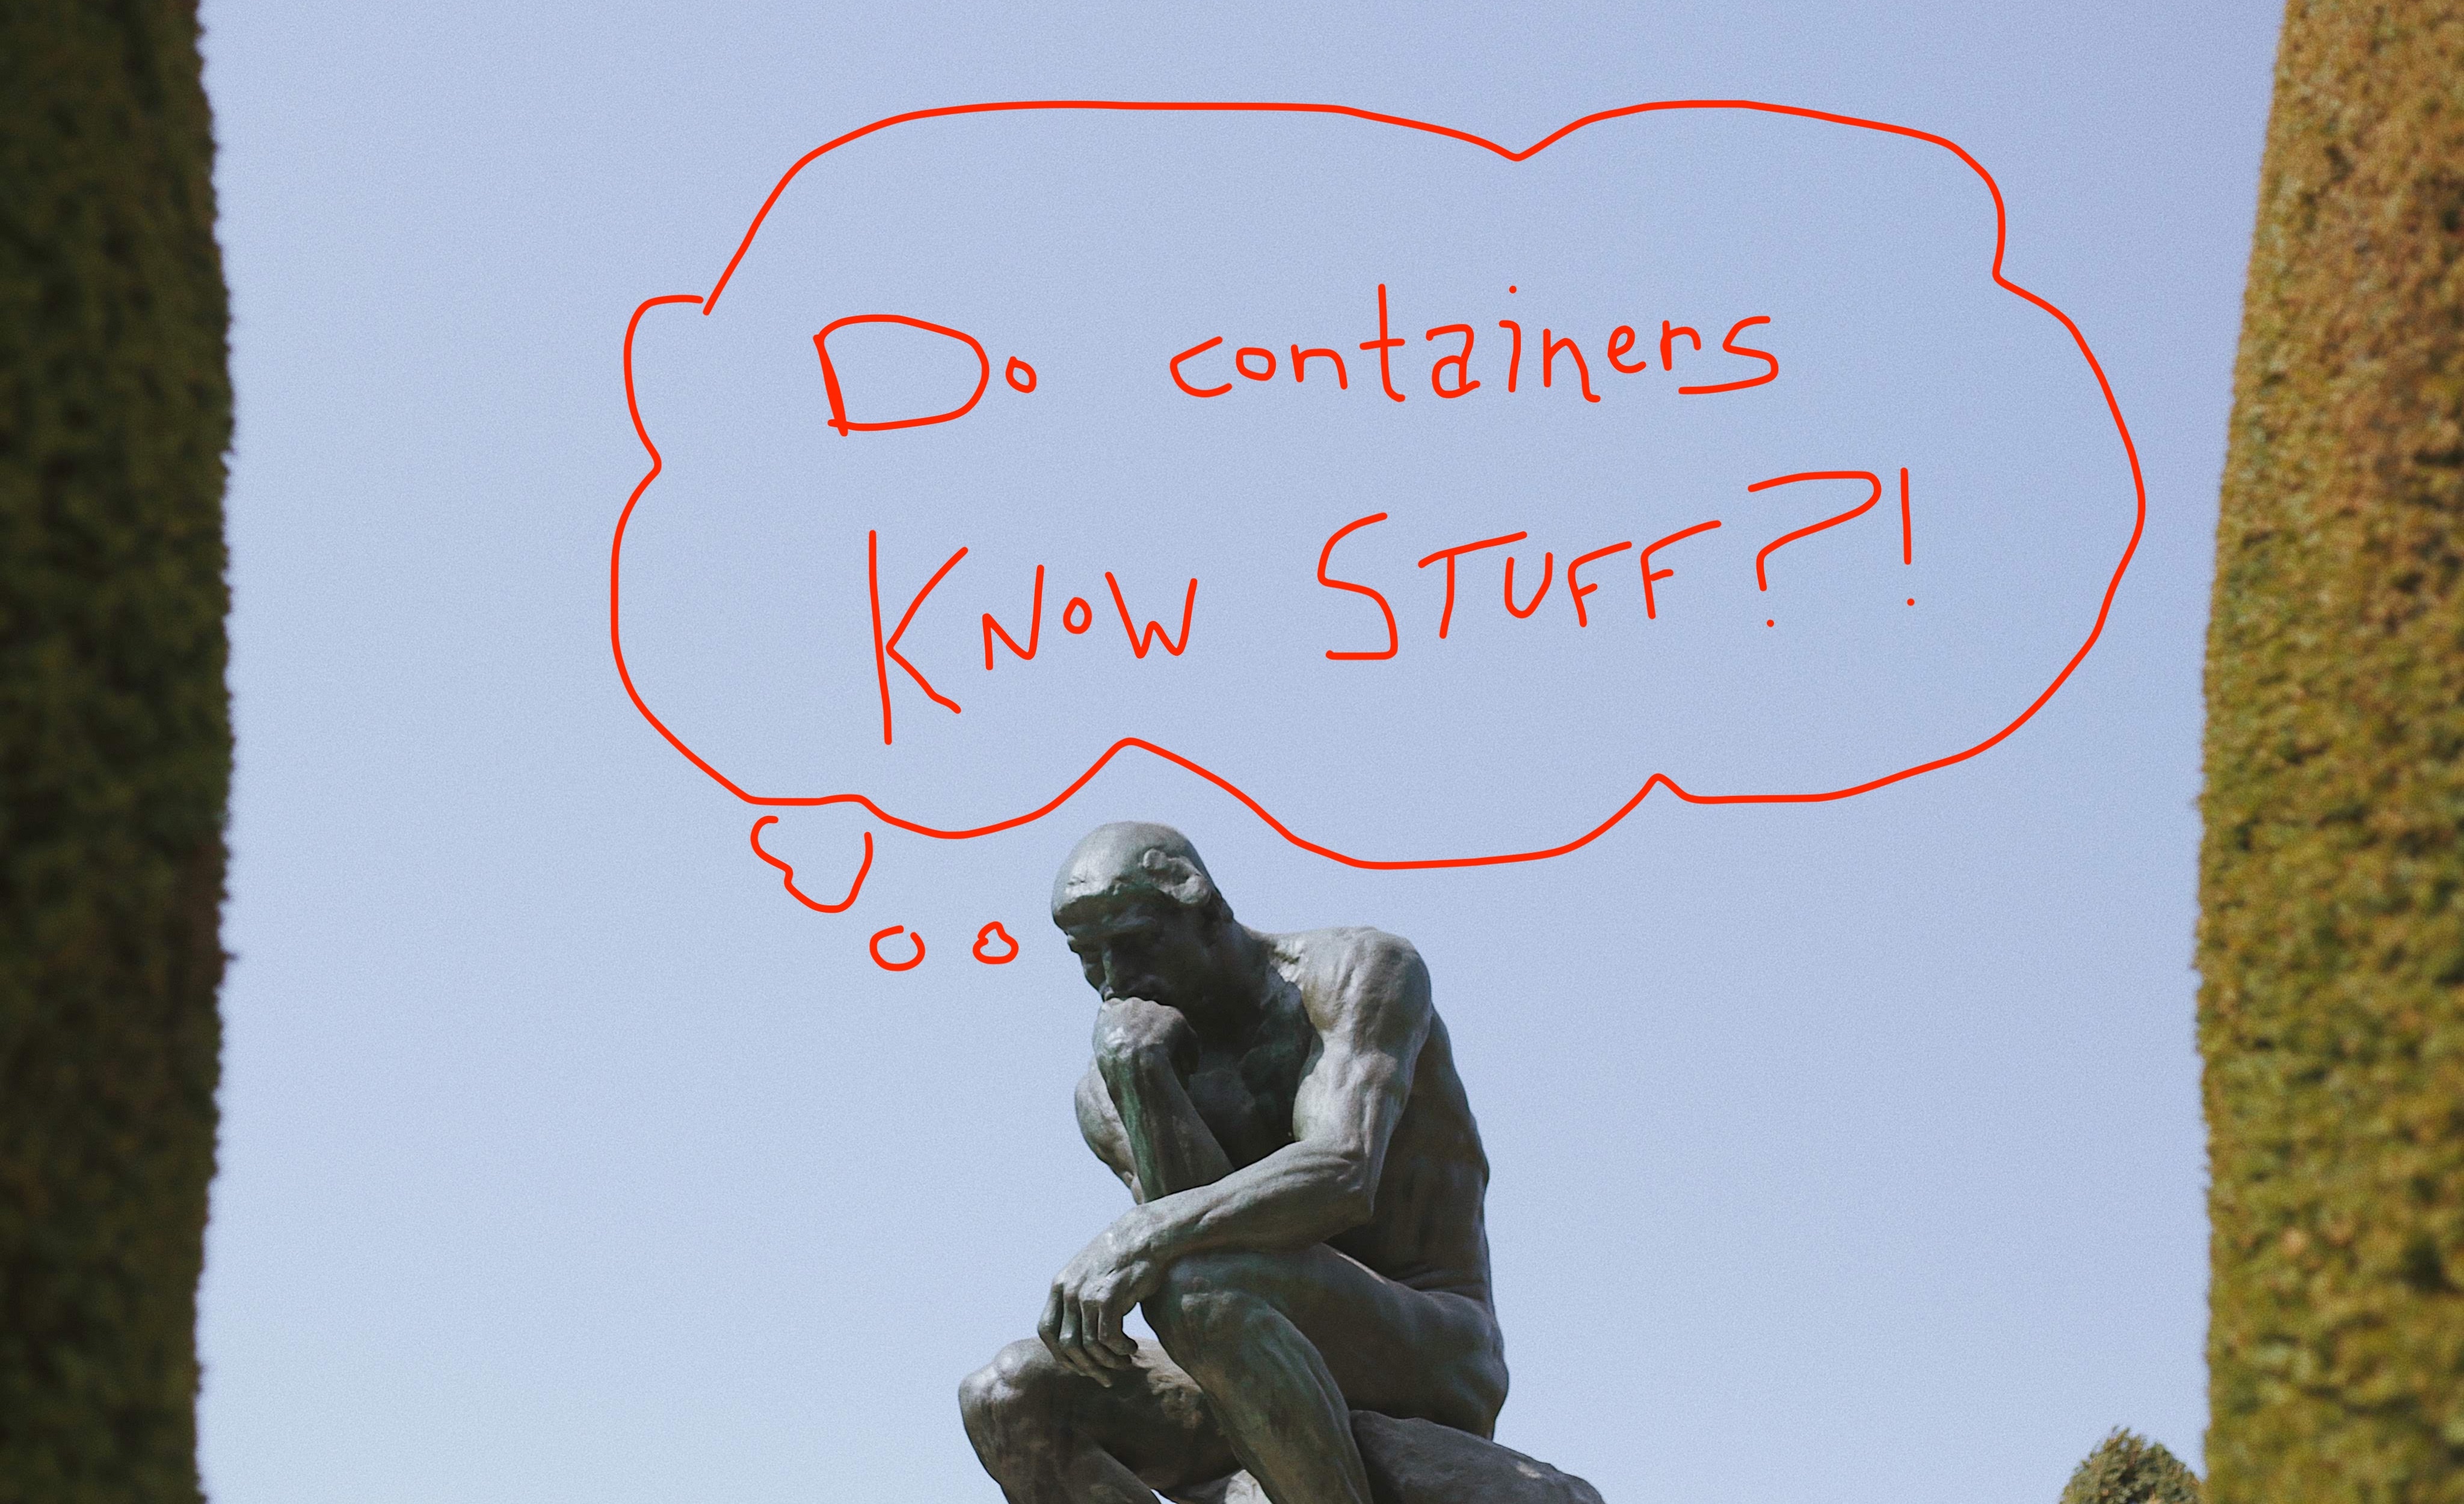 Statue of The Thinker
with a scribbled thought bubble asking:
do containers know stuff?
